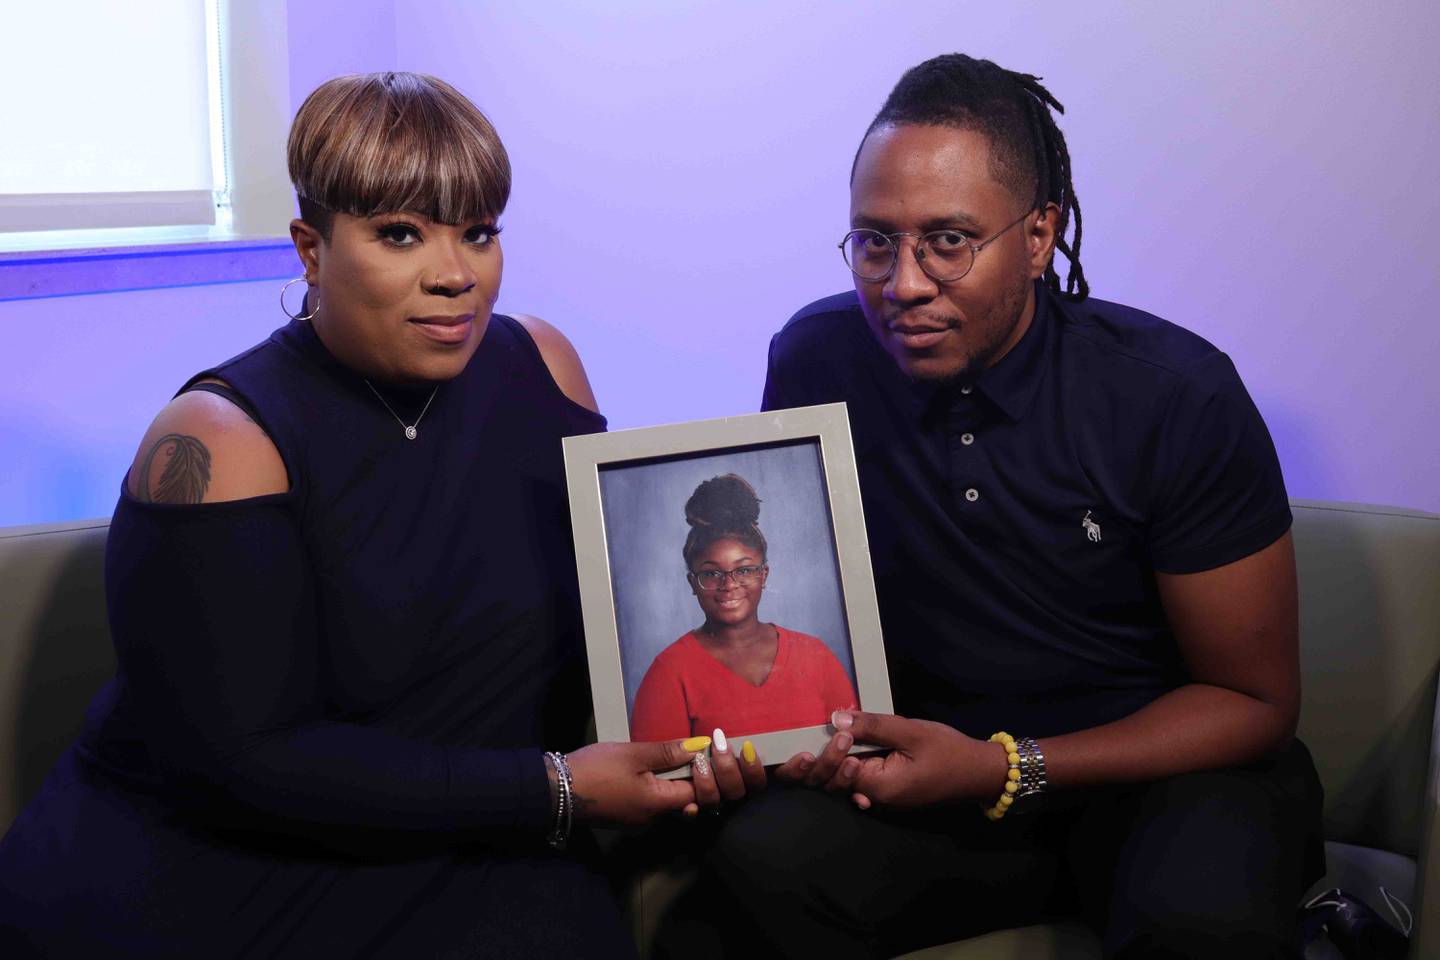 Krystal Morgan and Rashad Bingham of Bolingbrook hold a photo of their 15-year-old daughter Dykota Morgan, who died of complications from COVID-19 two days after she tested positive. The Will County Health Department is holding a COVID-19 vaccination clinic in Dykota's honor on June 26.